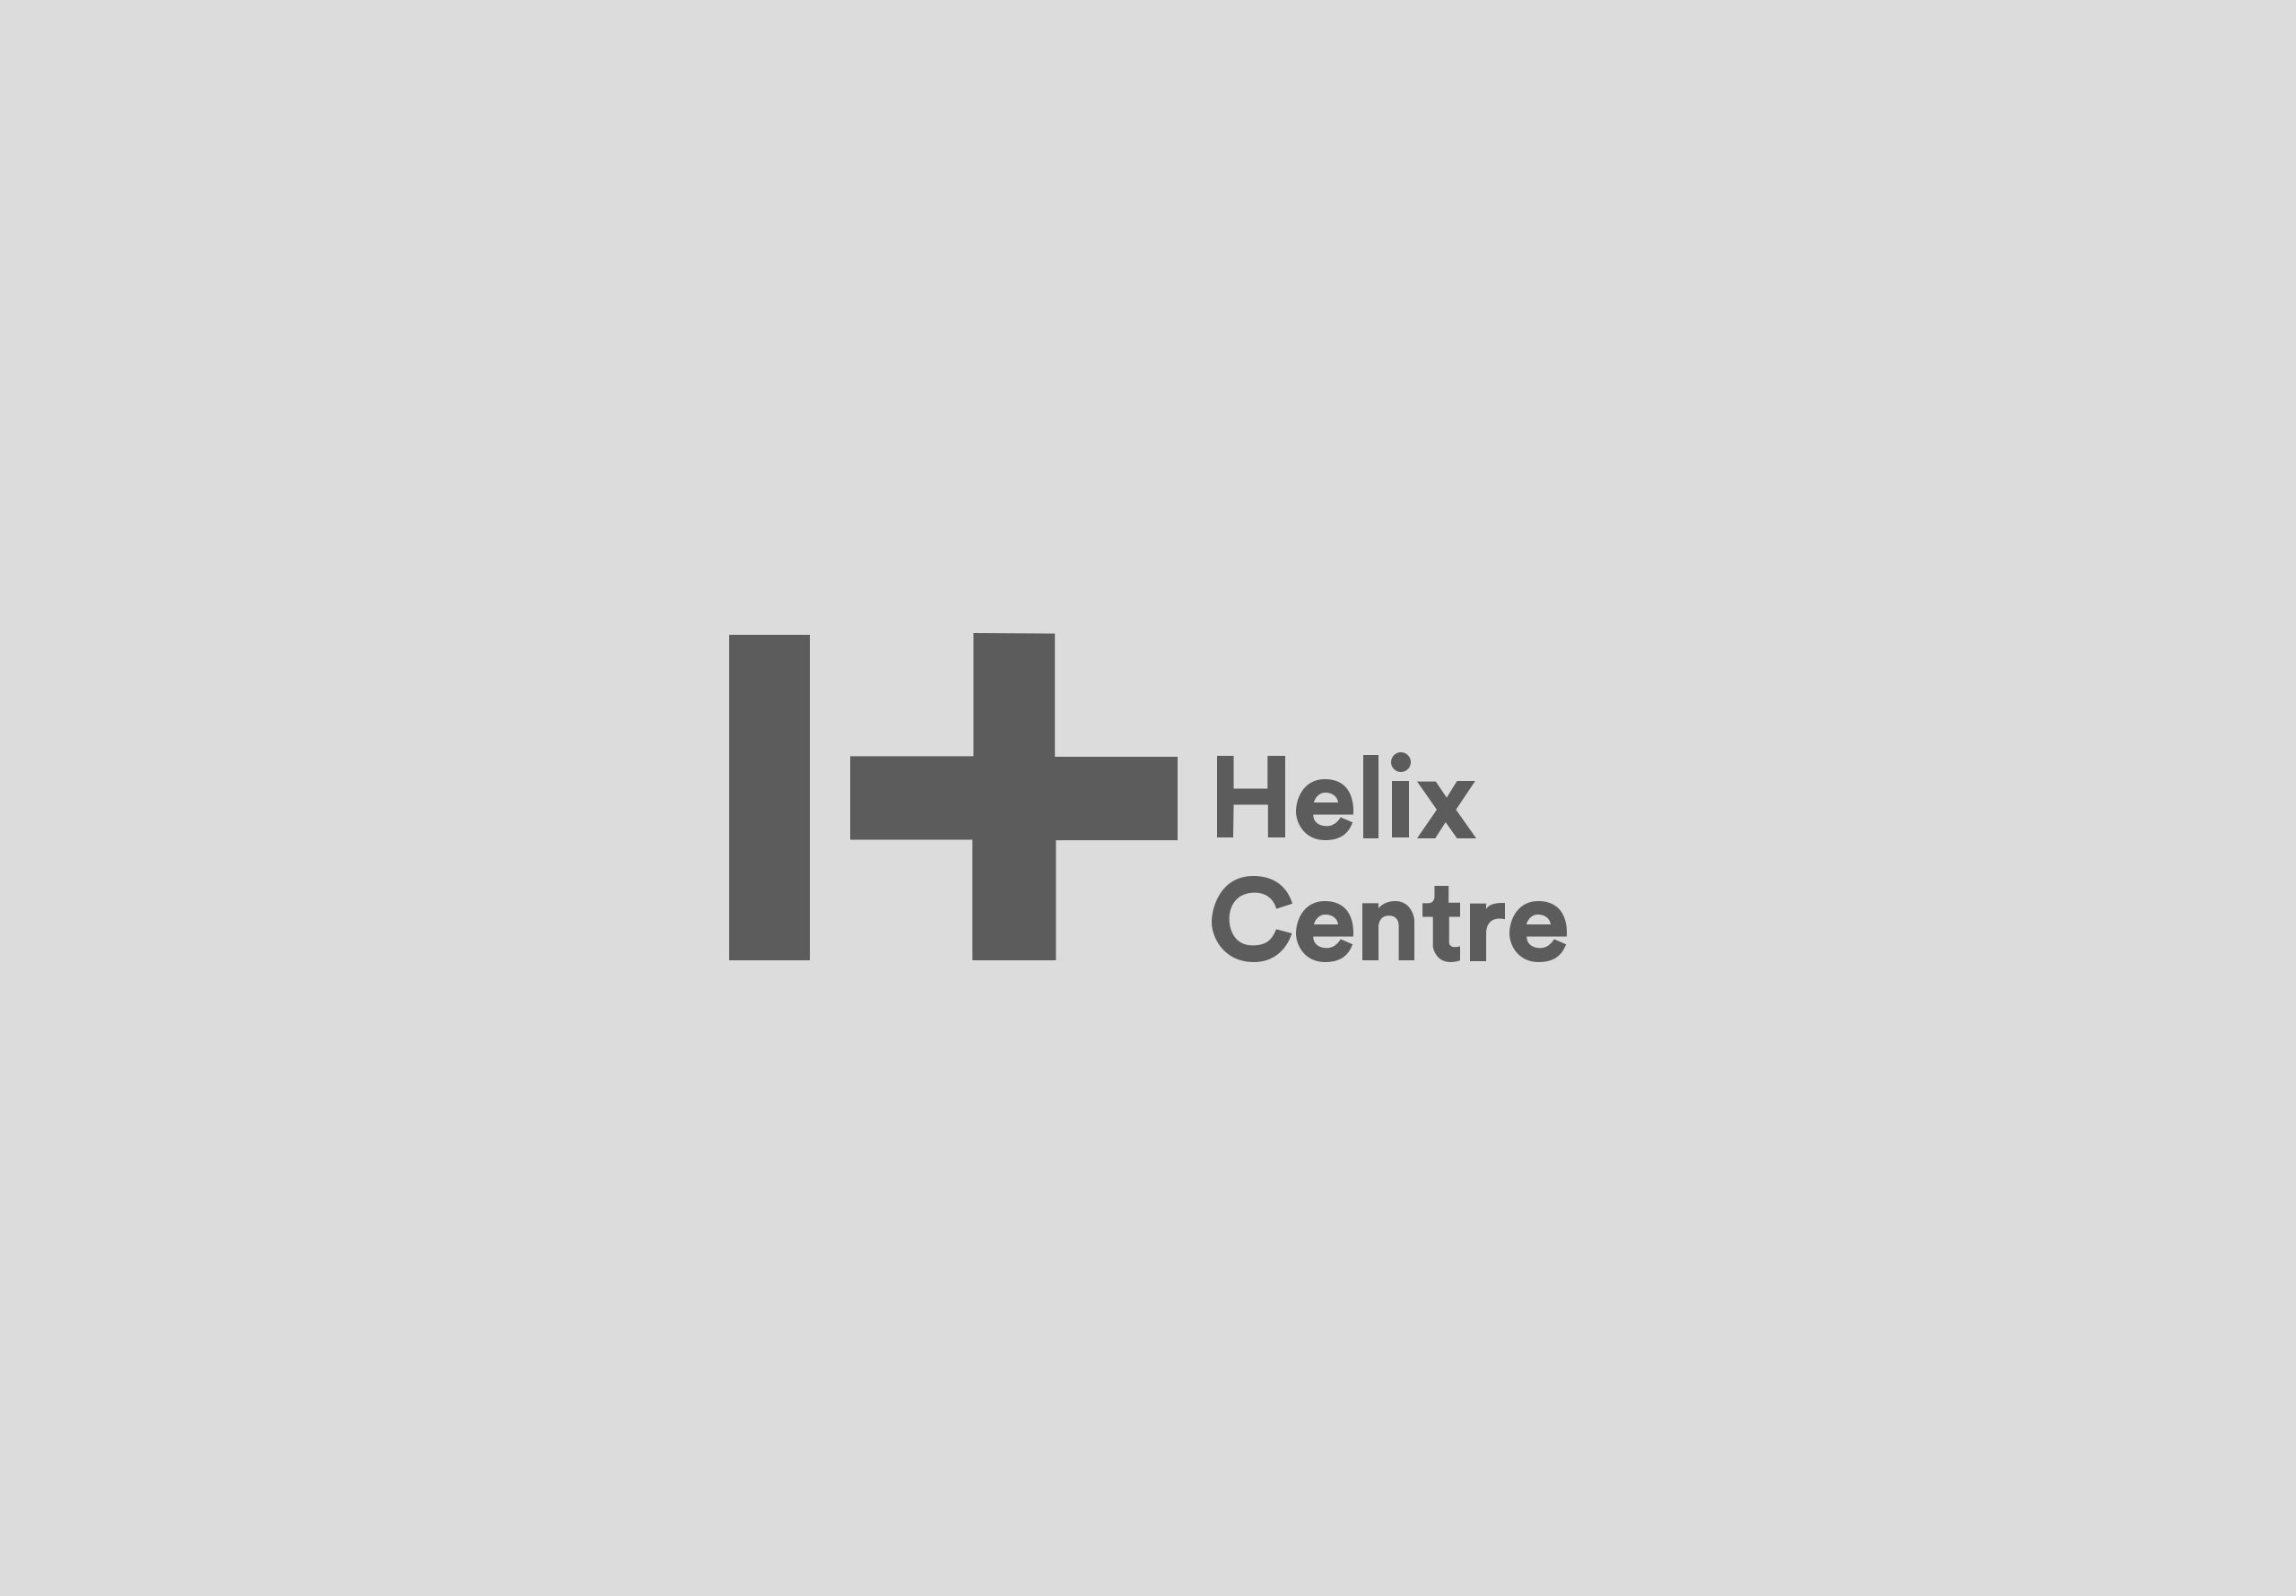 Rodd supported the Helix centre during its first year. Our role, to help cement healthcare innovation and inclusive design best practice.